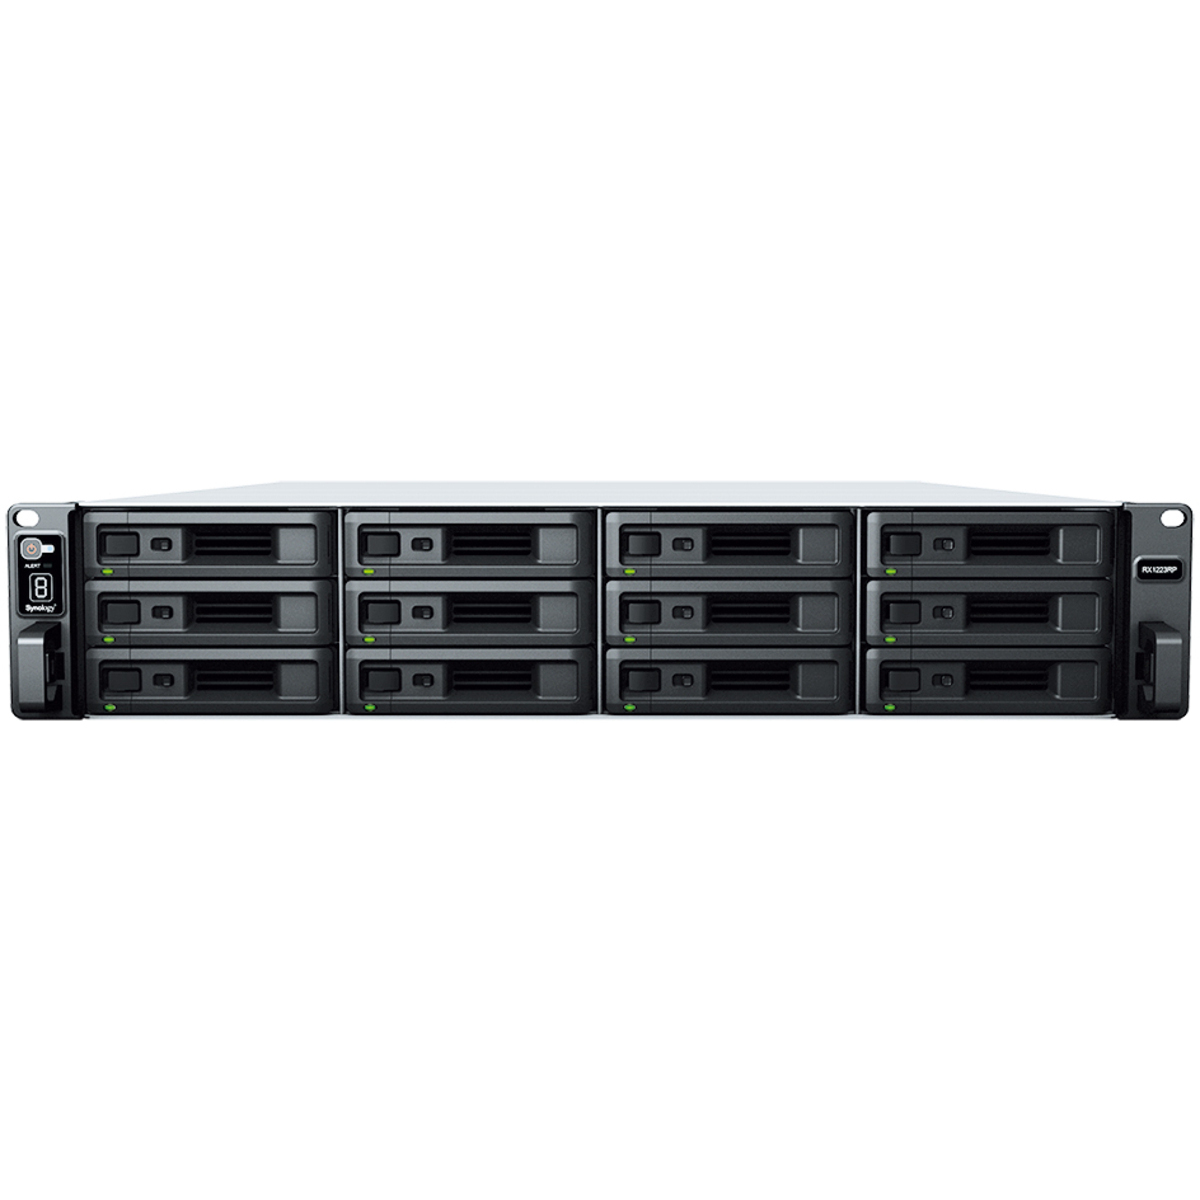 Synology RX1223RP External Expansion Drive 154tb 12-Bay RackMount Large Business / Enterprise Expansion Enclosure 7x22tb Seagate IronWolf Pro ST22000NT001 3.5 7200rpm SATA 6Gb/s HDD NAS Class Drives Installed - Burn-In Tested RX1223RP External Expansion Drive